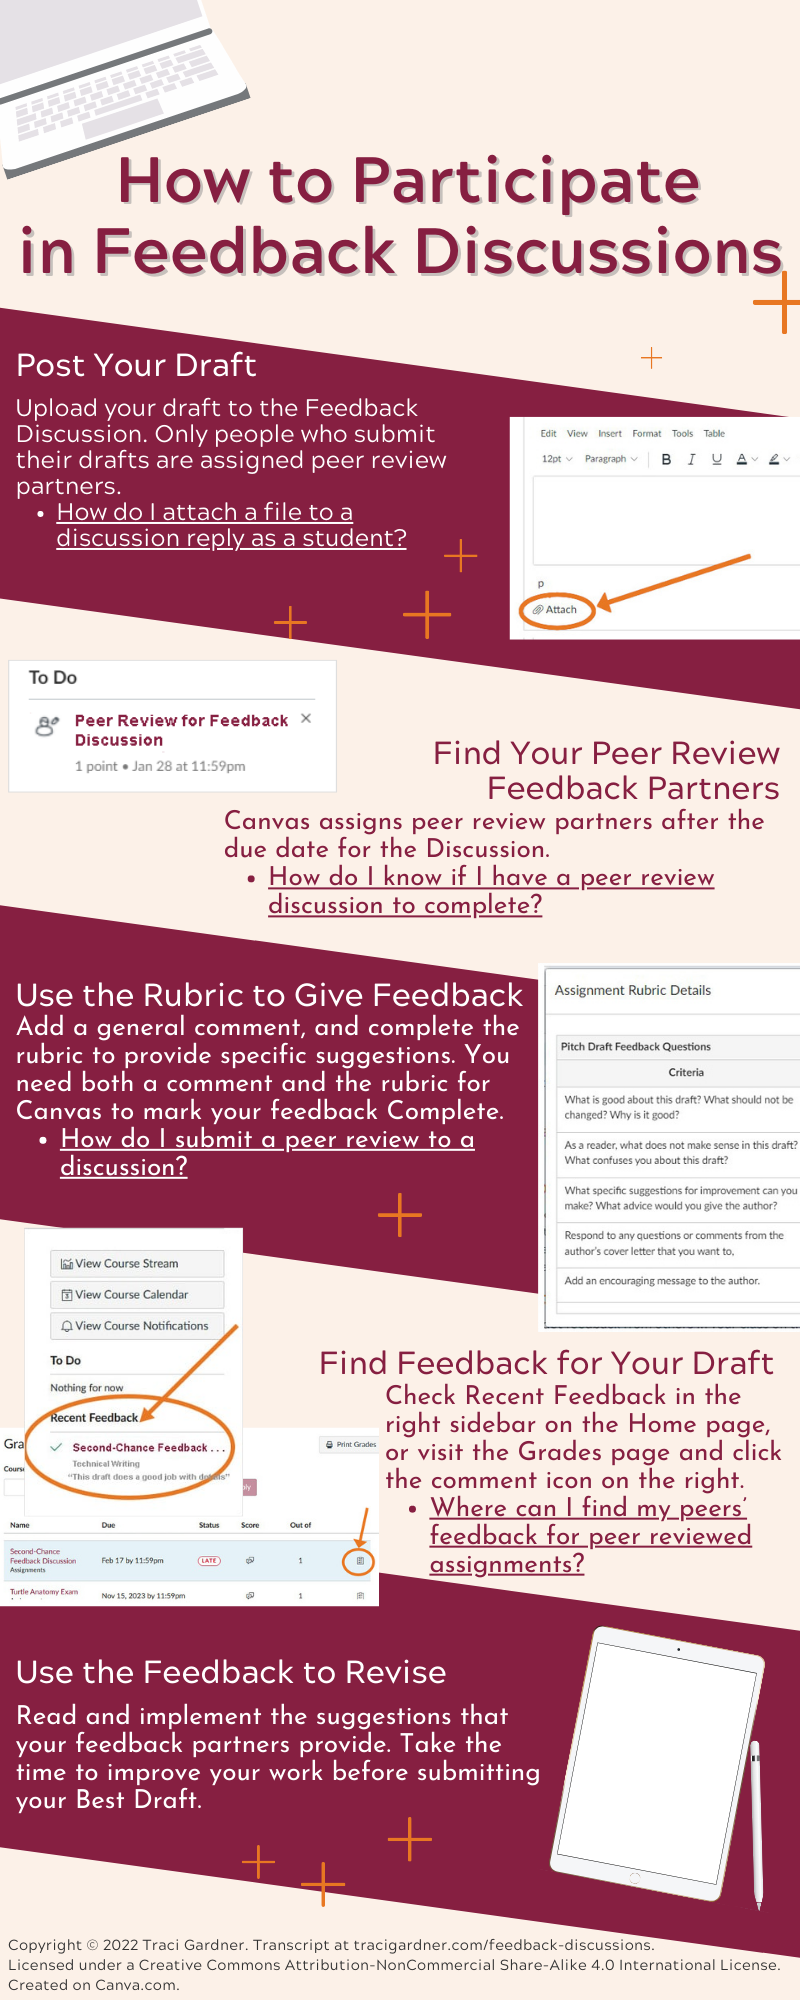 Infographic: How to Participate in Feedback Discussions